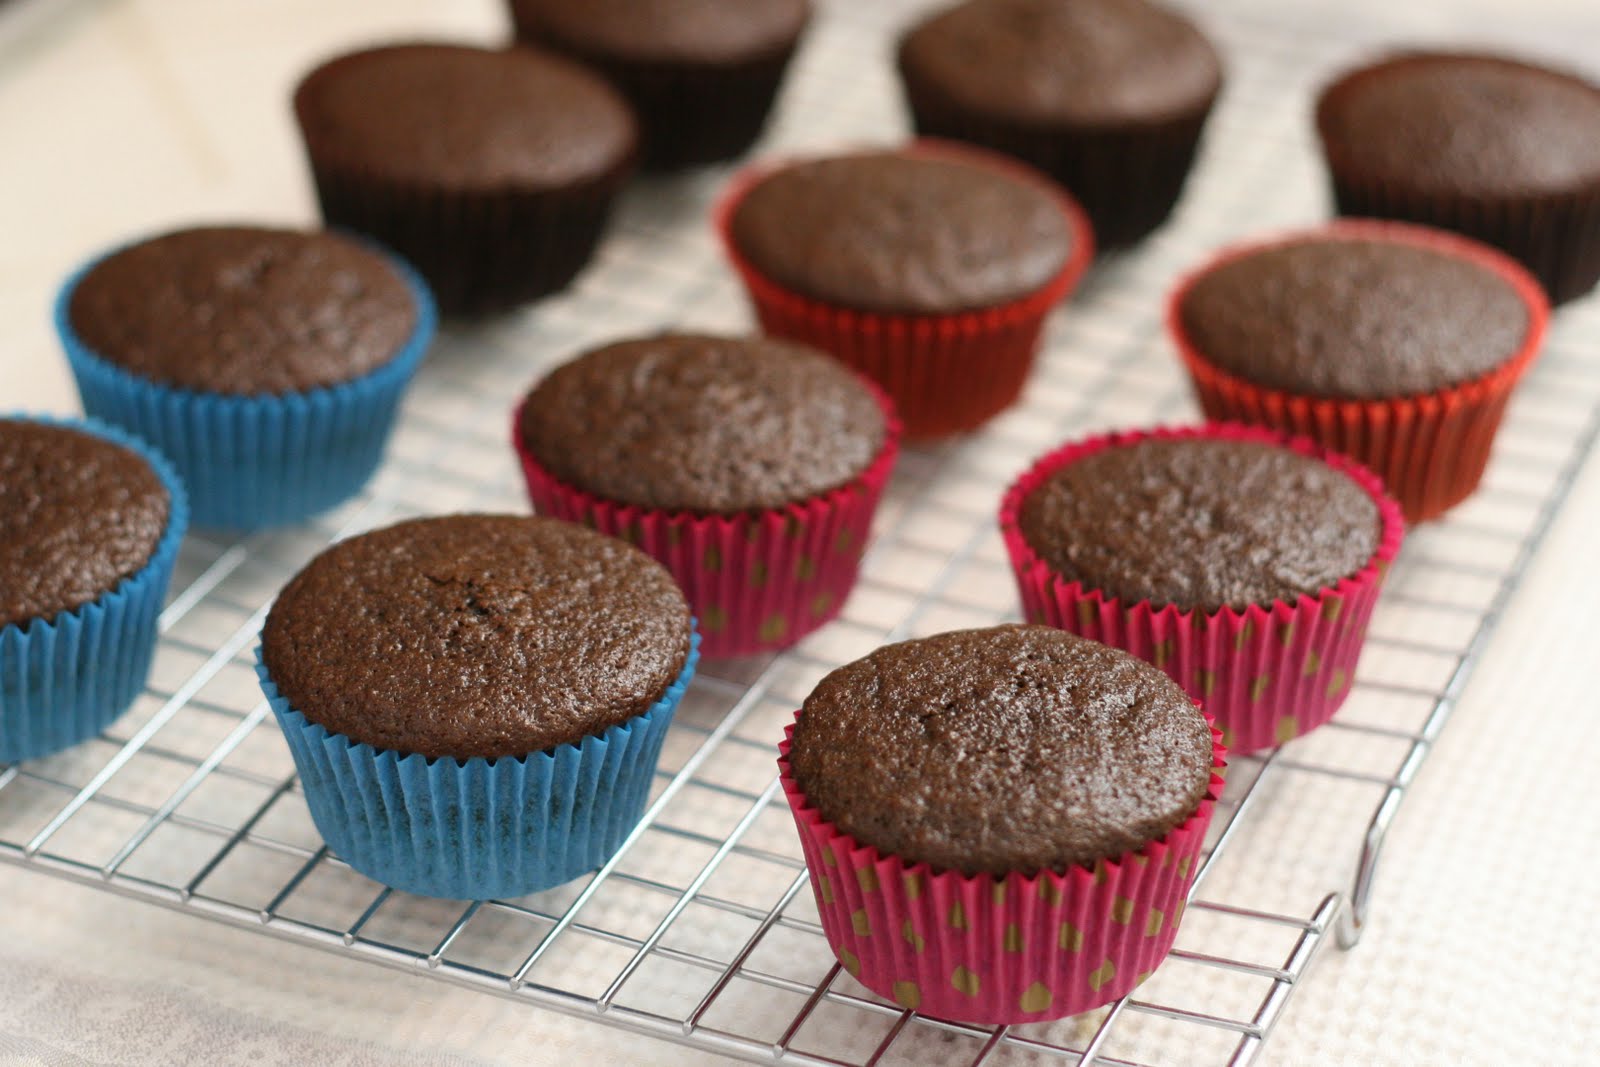 How to Bake Perfect Cupcakes